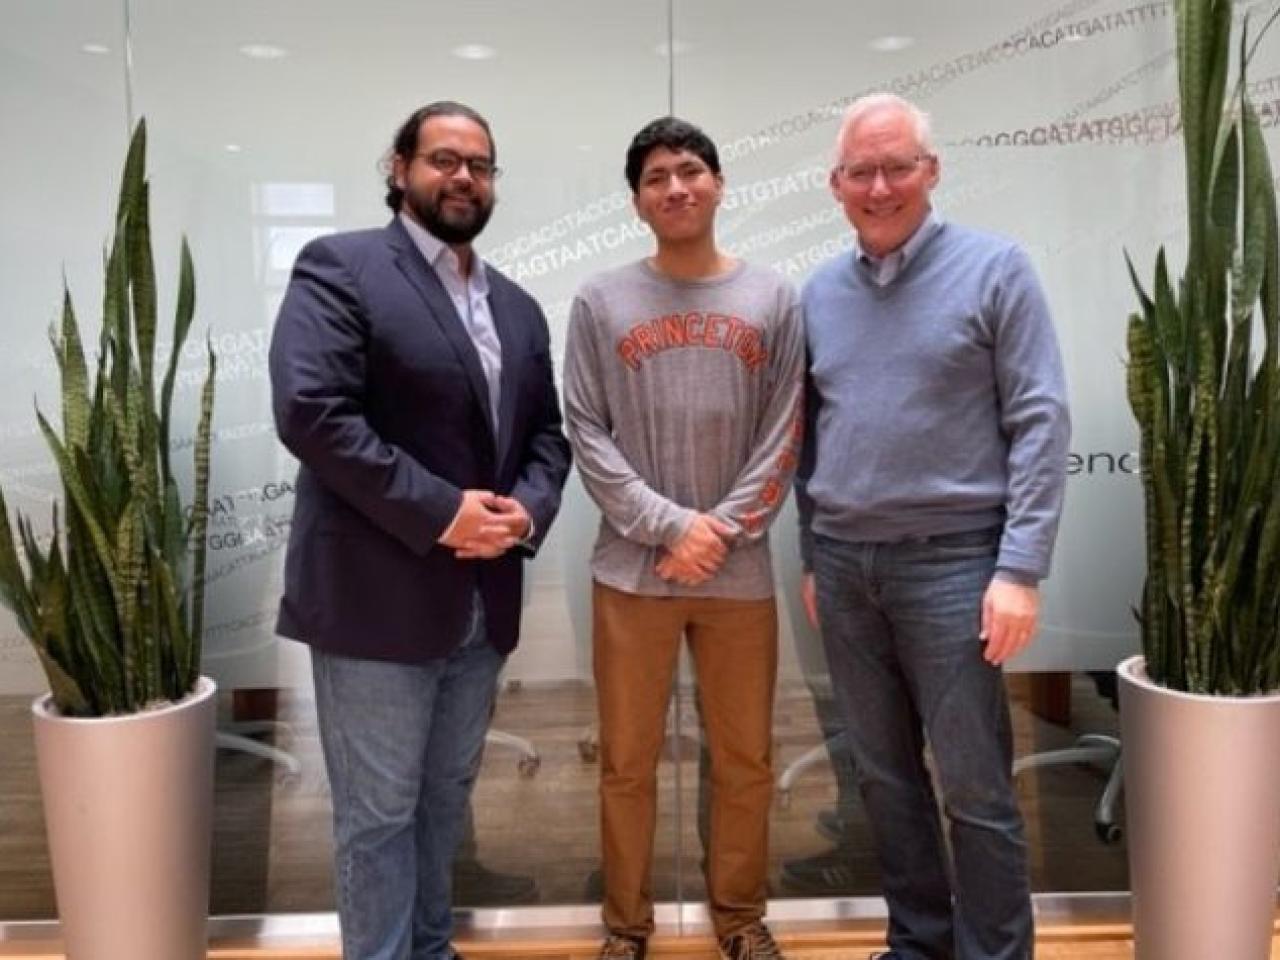 SD2's H. Puentes and student Alejandro Pliego visit with Illumina Chief Public Affairs Officer John Frank at the company's San Diego HQ.